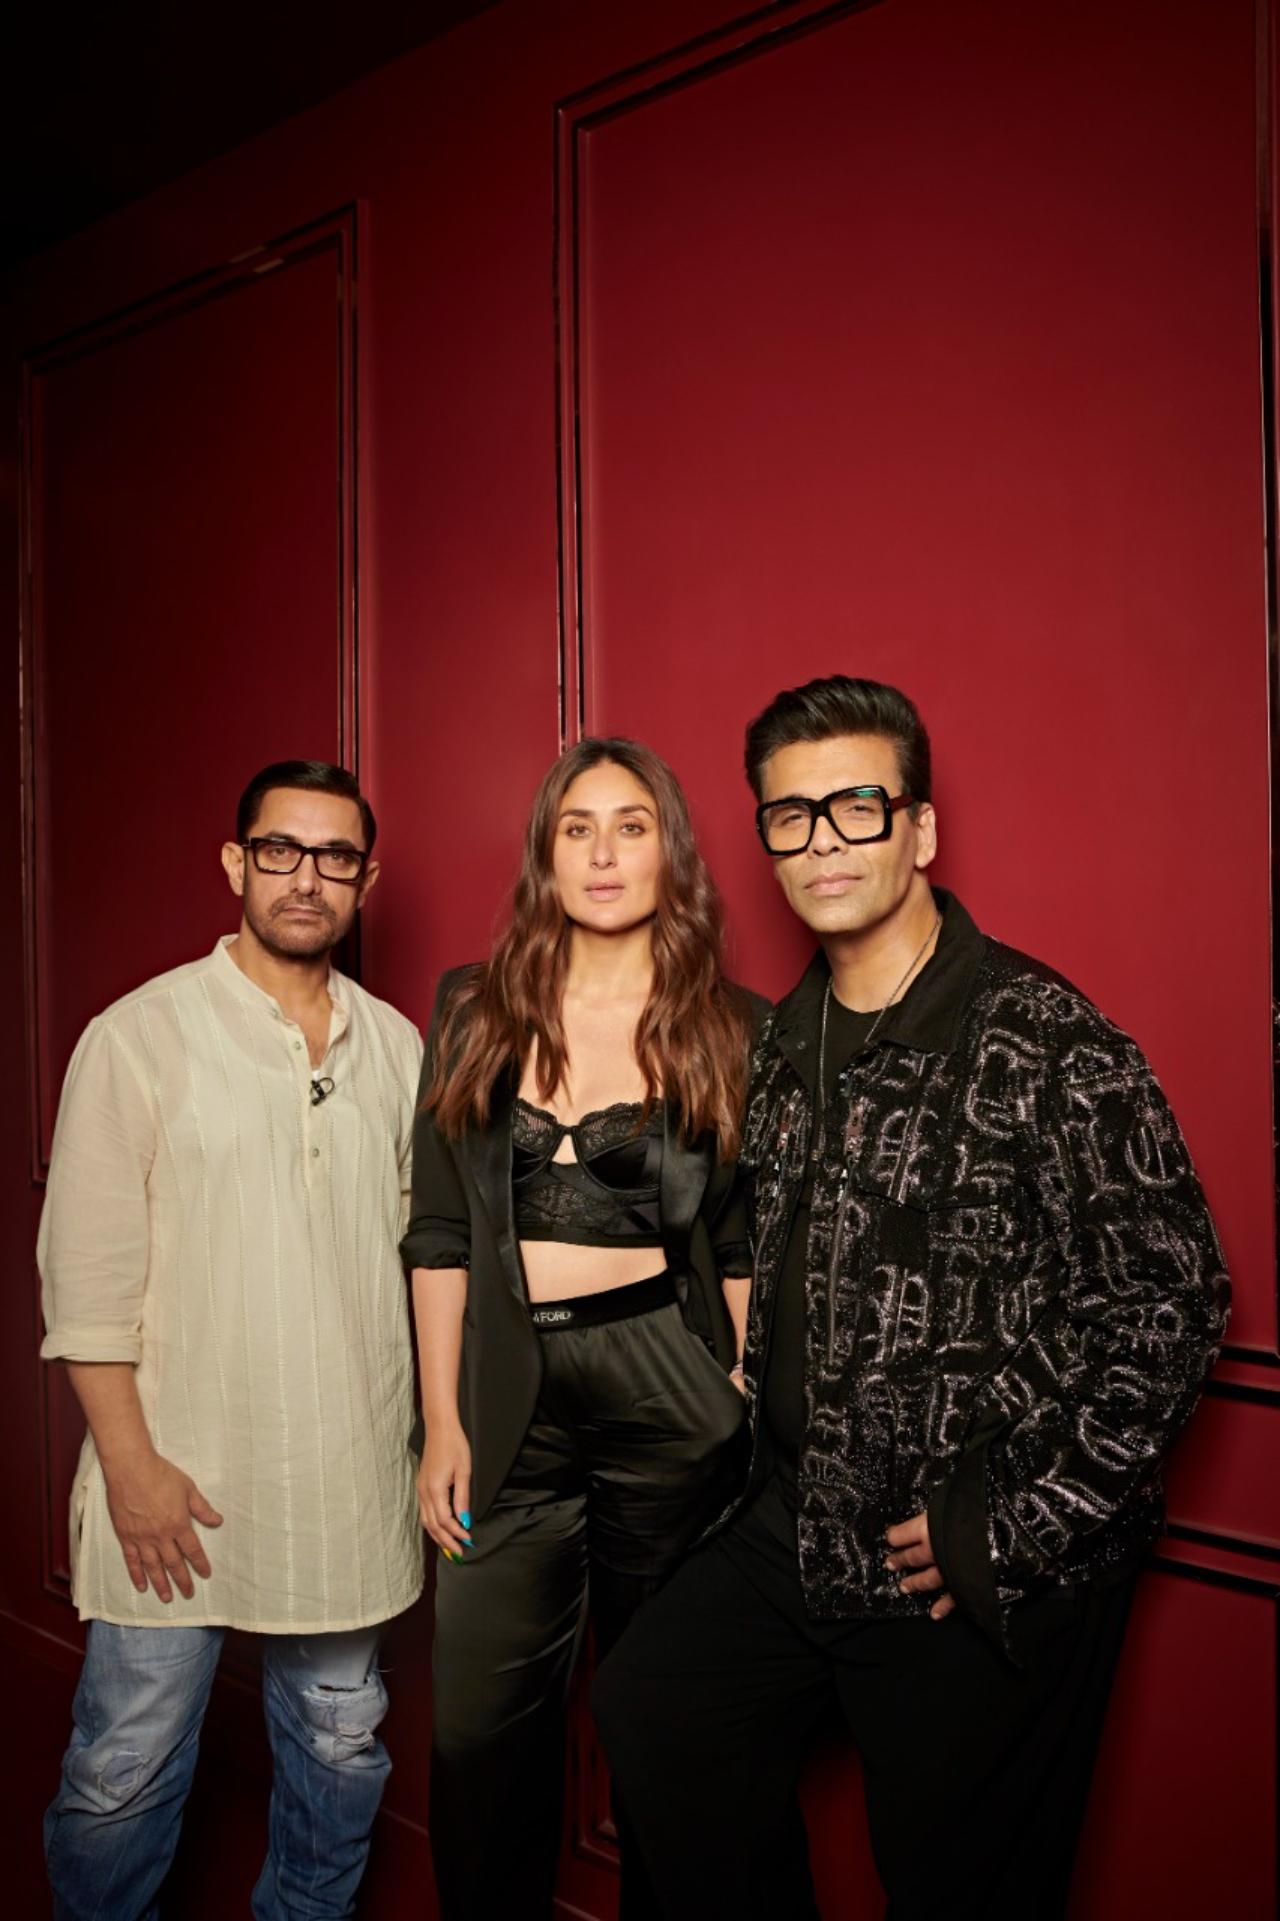 Aamir Khan's fashion choices
On Thursday's episode, Aamir Khan and Kareena Kapoor Khan participated in a new segment called “Actor Trolling Actor” where the two actors had to ask questions to each other.he saw the card that had the question, “On a scale of 1-10, rate my fashion sense.” Both Karan and Kareena burst out laughing. In her iconic Poo mode, Kareena said, “Non-applicable.” To this, Aamir responded with a smile, “She means there is no fashion sense.”
Speaking about how his ex-wife Kiran Rao reacts to his fashion choices, Aamir said, “Kiran and I have this standard joke. I have weird 3/4th pants. They fit here (pointing to right below his knees). With an elastic. They have a weird shape. But I find them very comfortable. So, when I'm going out, Kiran asks me, 